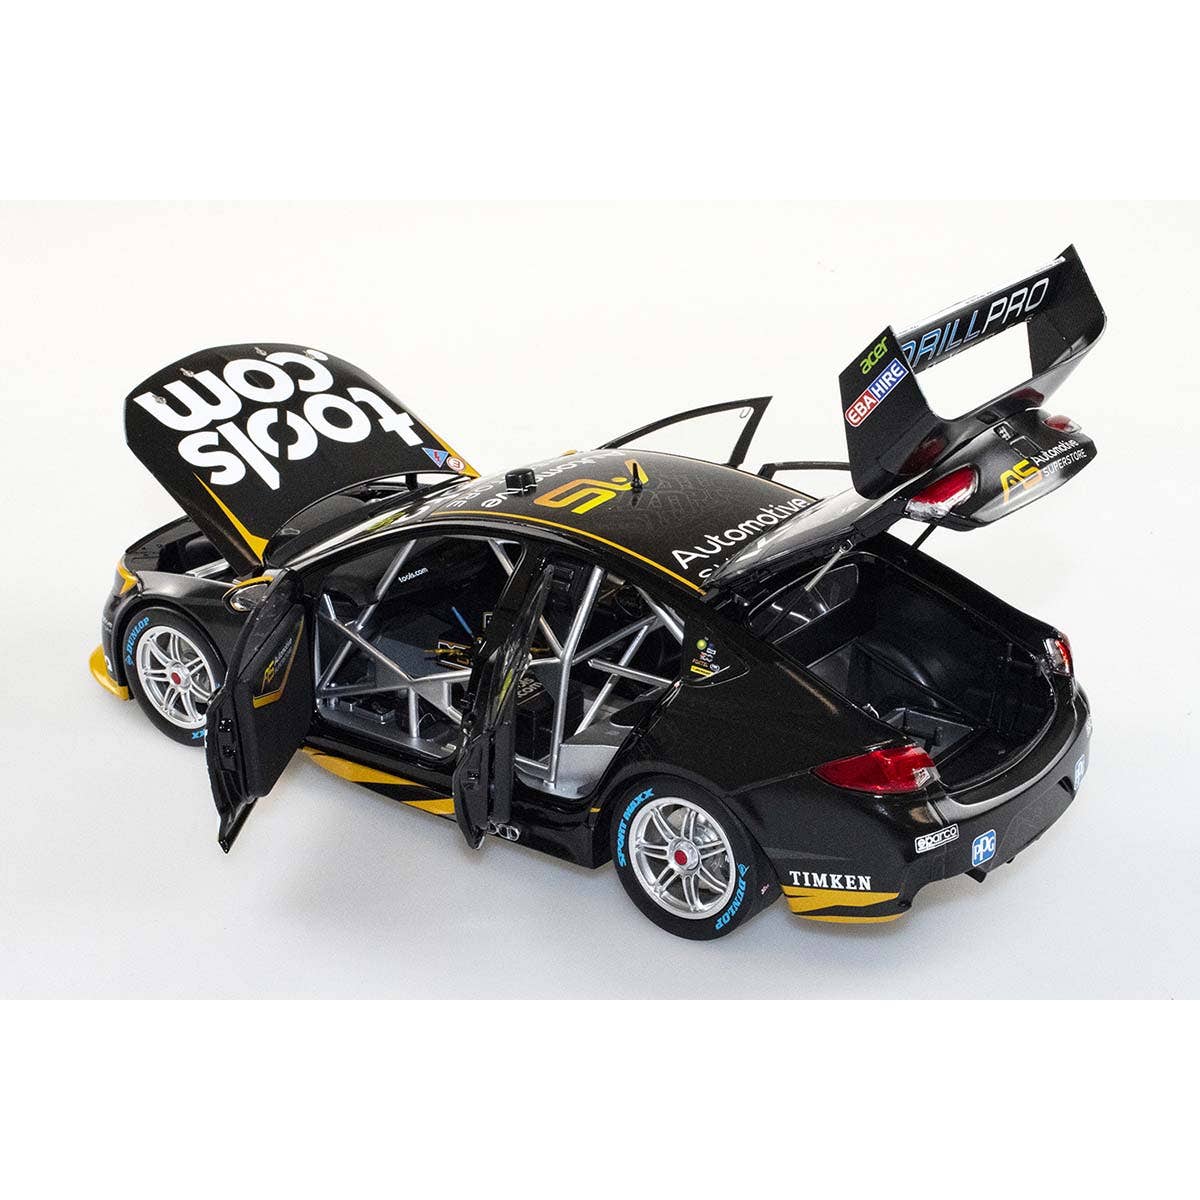 HOLDEN ZB COMMODORE - BJR - MACAULAY JONES #96 Automotive Superstore - NED Whisky Tasmania Supersprint Race 4 - 1:18 Scale Diecast Model Car